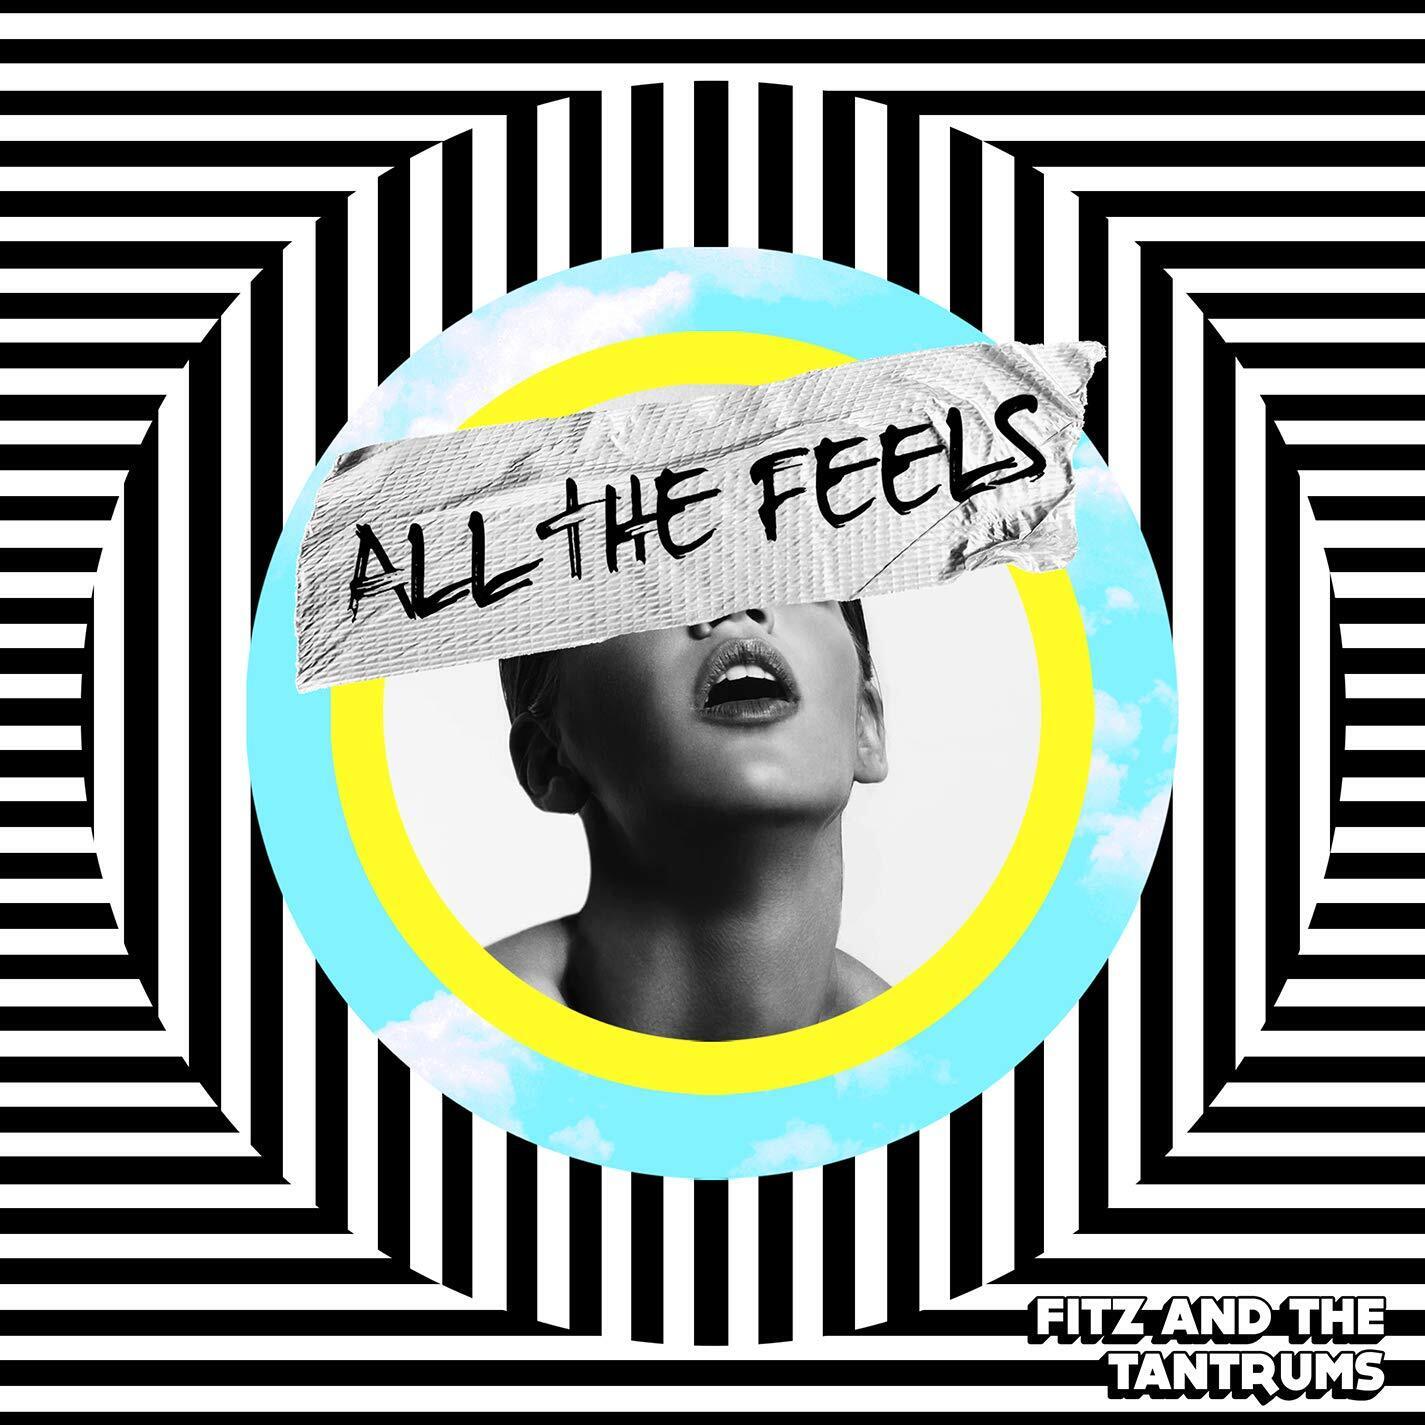 Fitz & The Tantrums All The Feels (Vinyl)